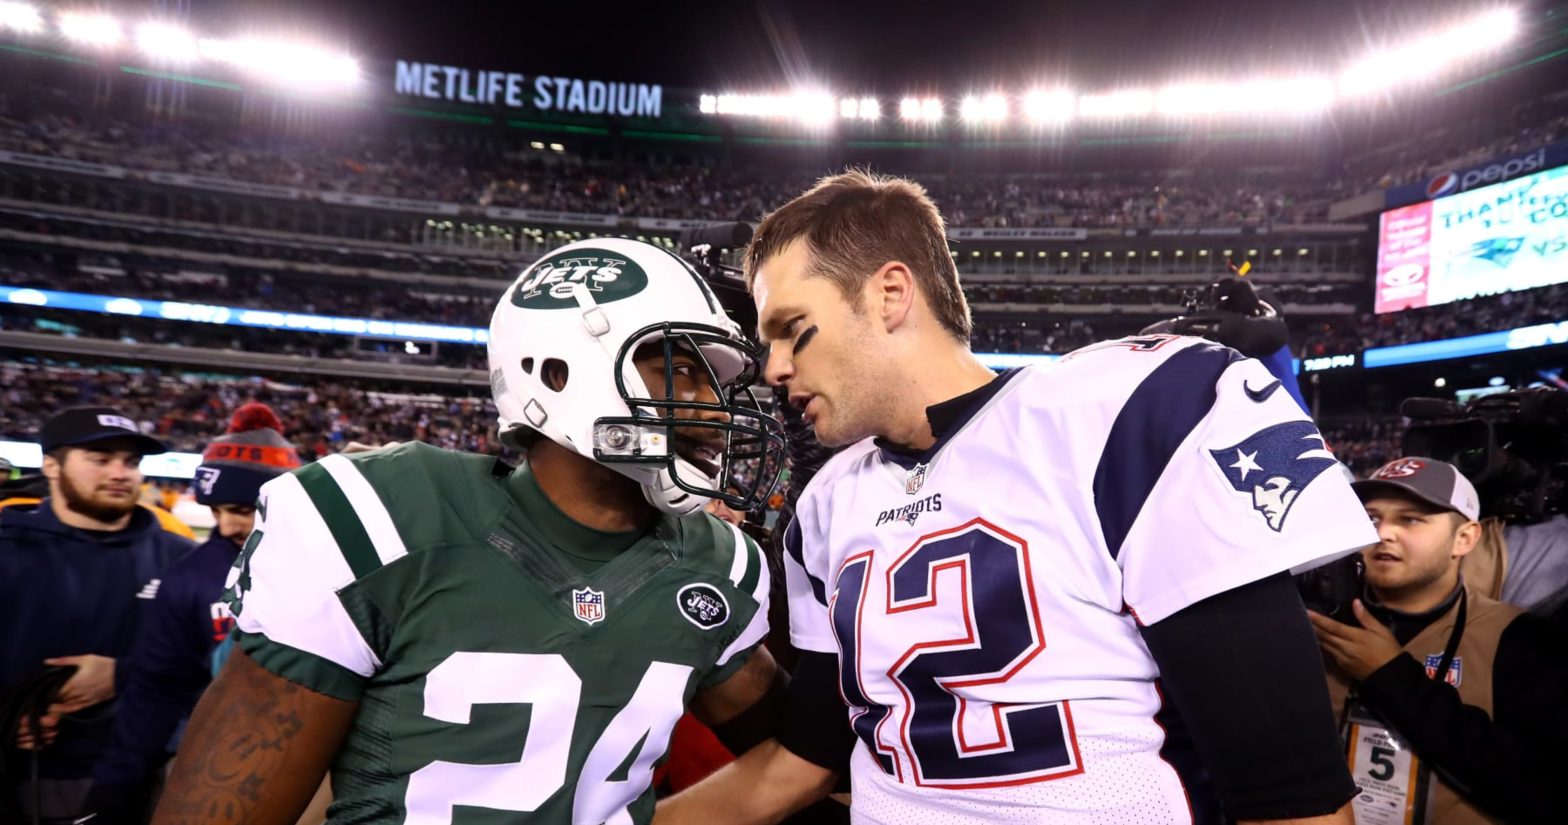 Tom Brady Gave Tearful Apology to Patriots for Deflategate, Darrelle Revis Says